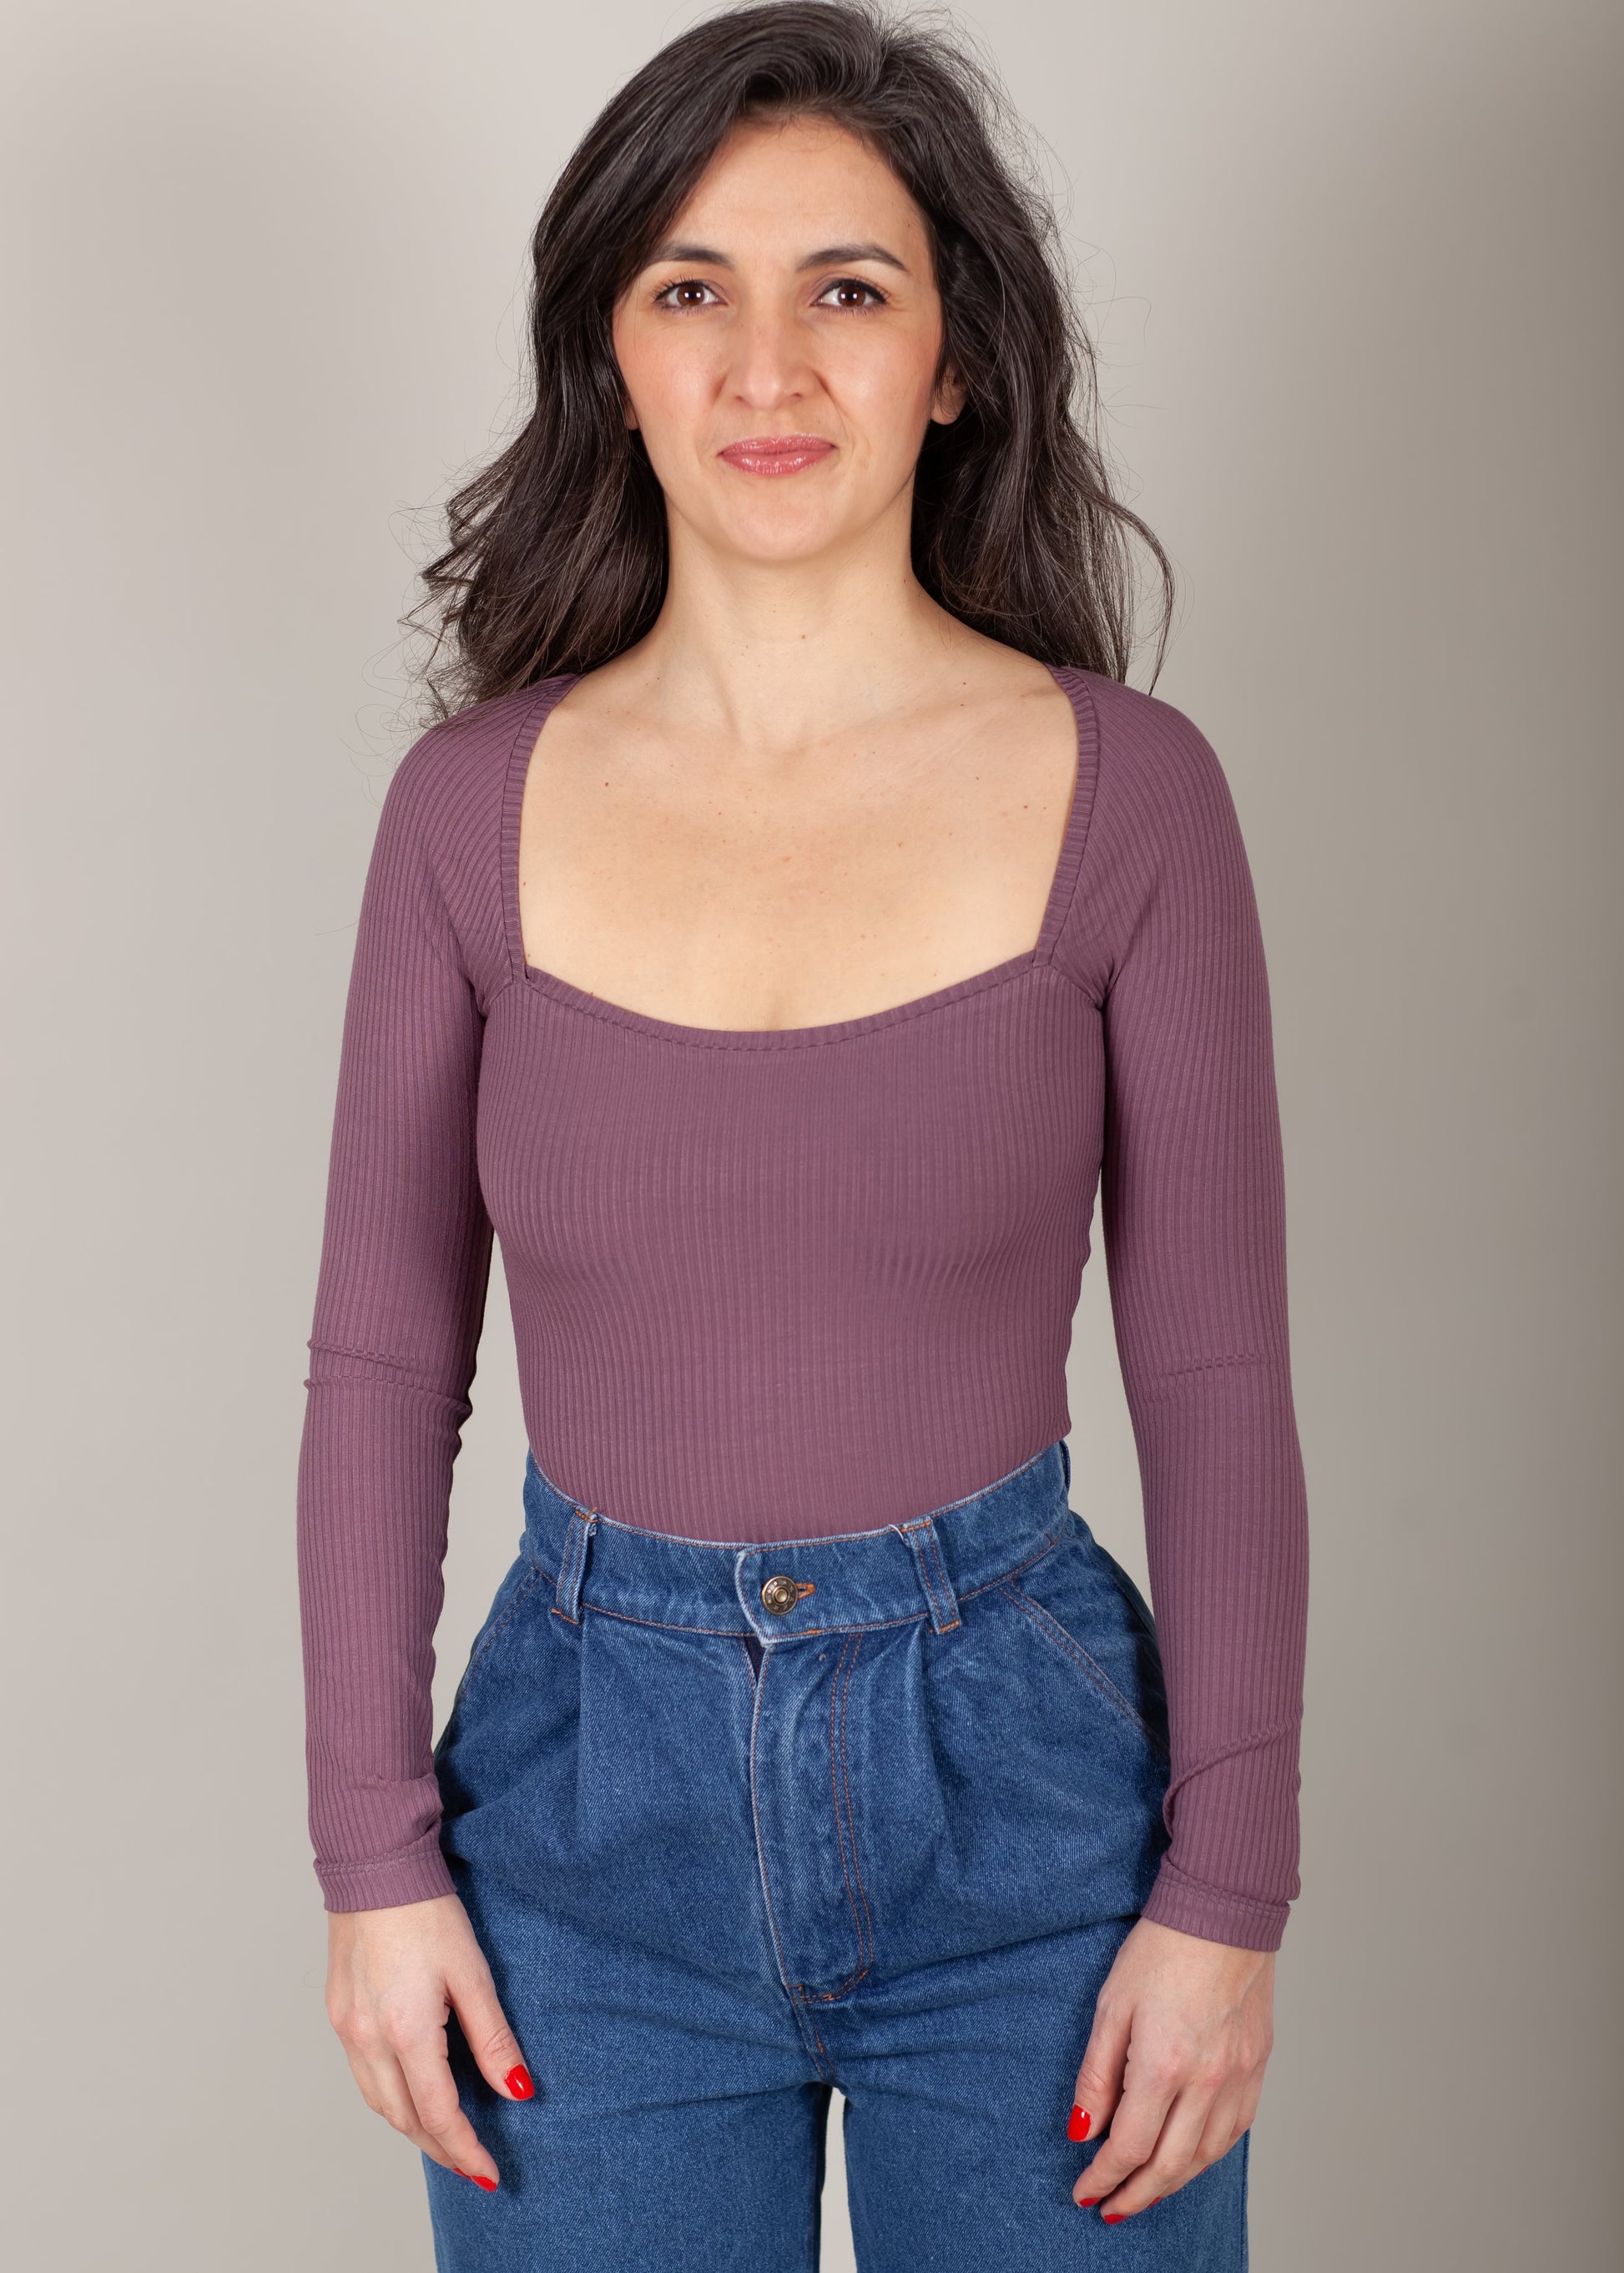 Our Top 10 Sewing Patterns For Rib Knit Fabric